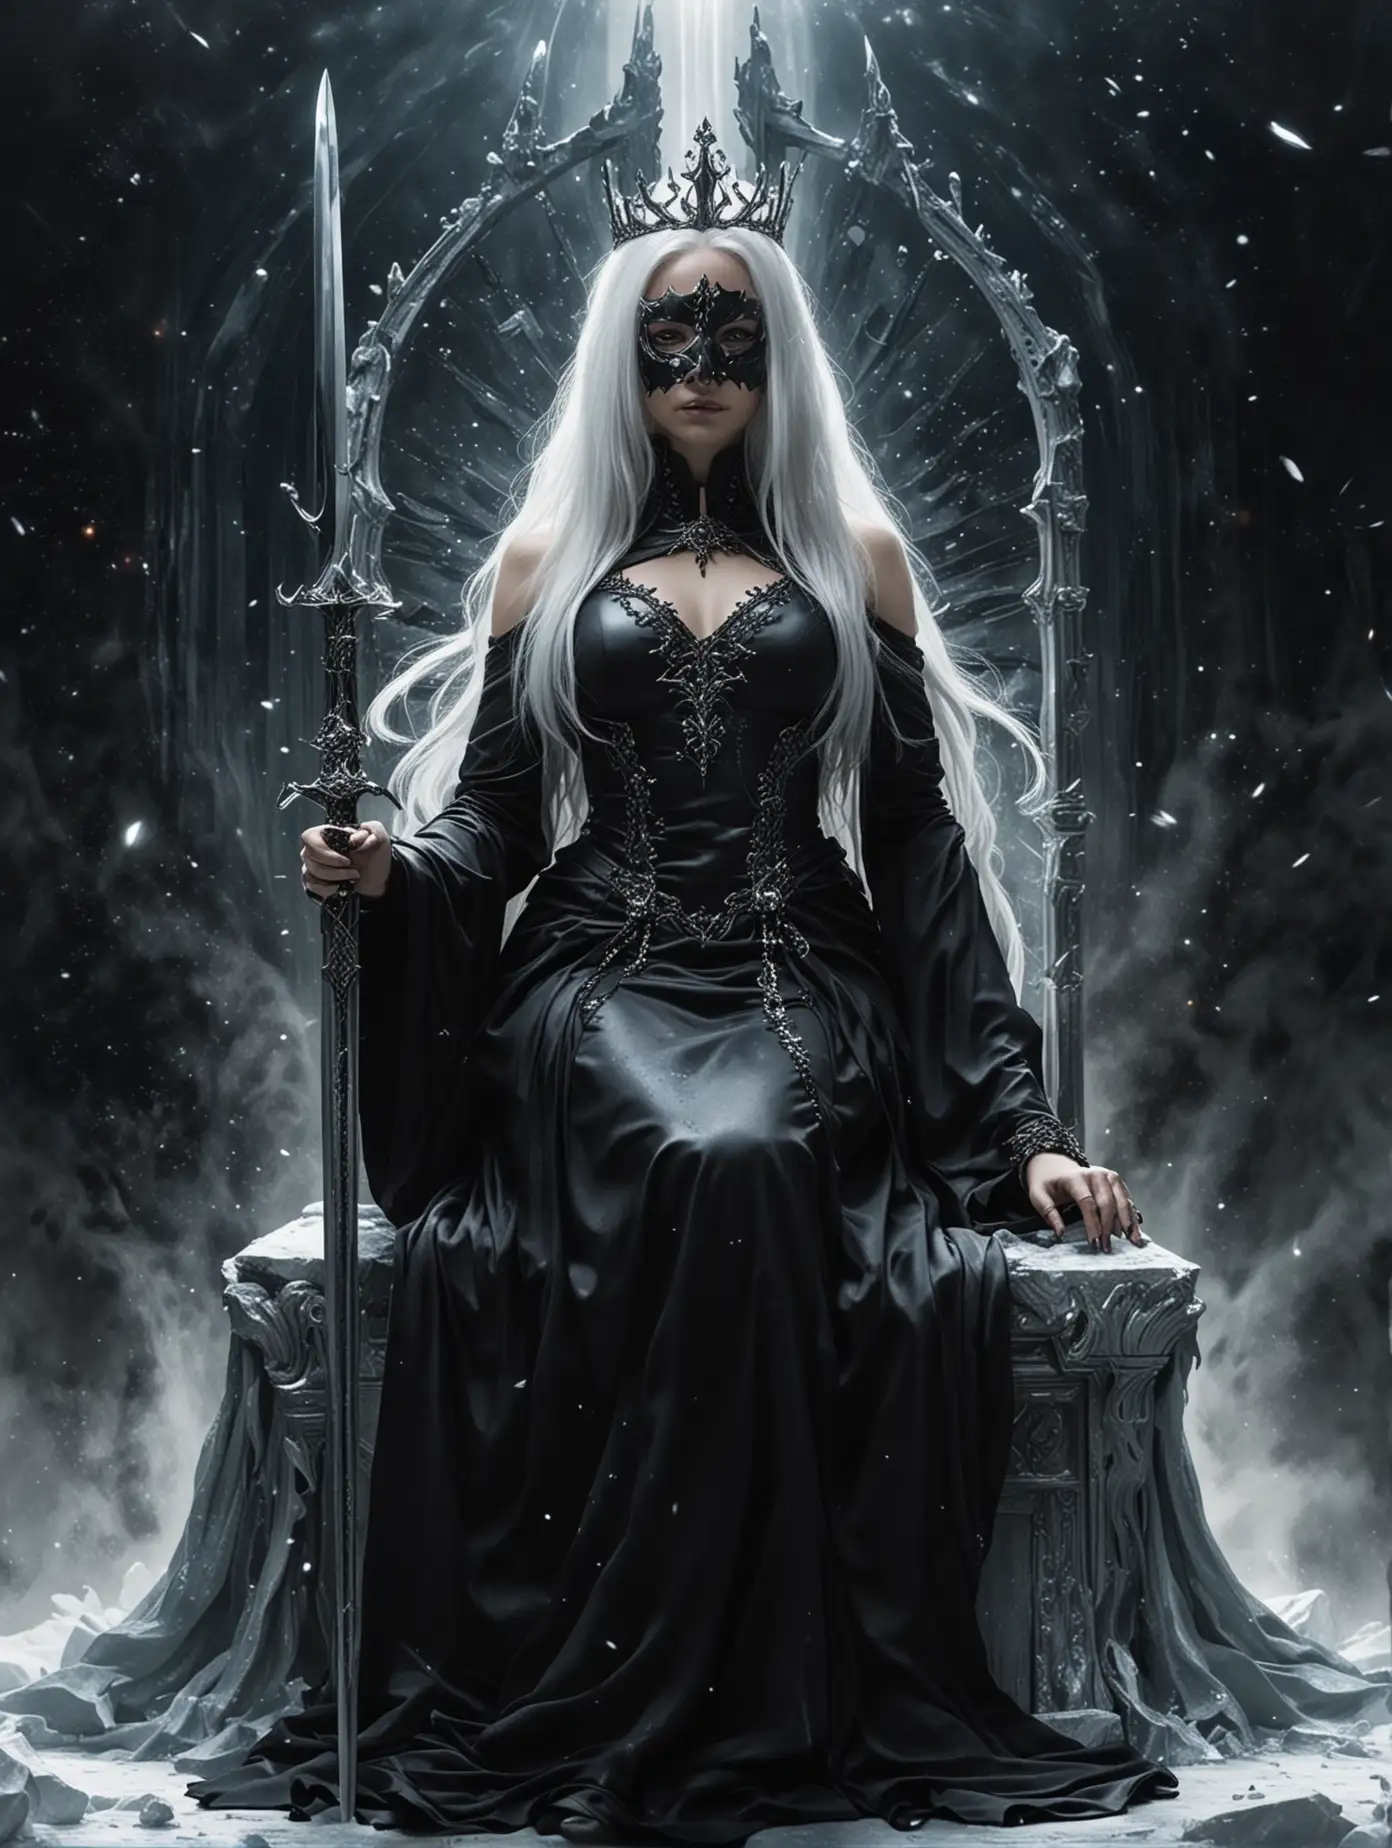 Mysterious-Sister-Hesseryth-on-Icy-Throne-Amidst-Cosmic-Void